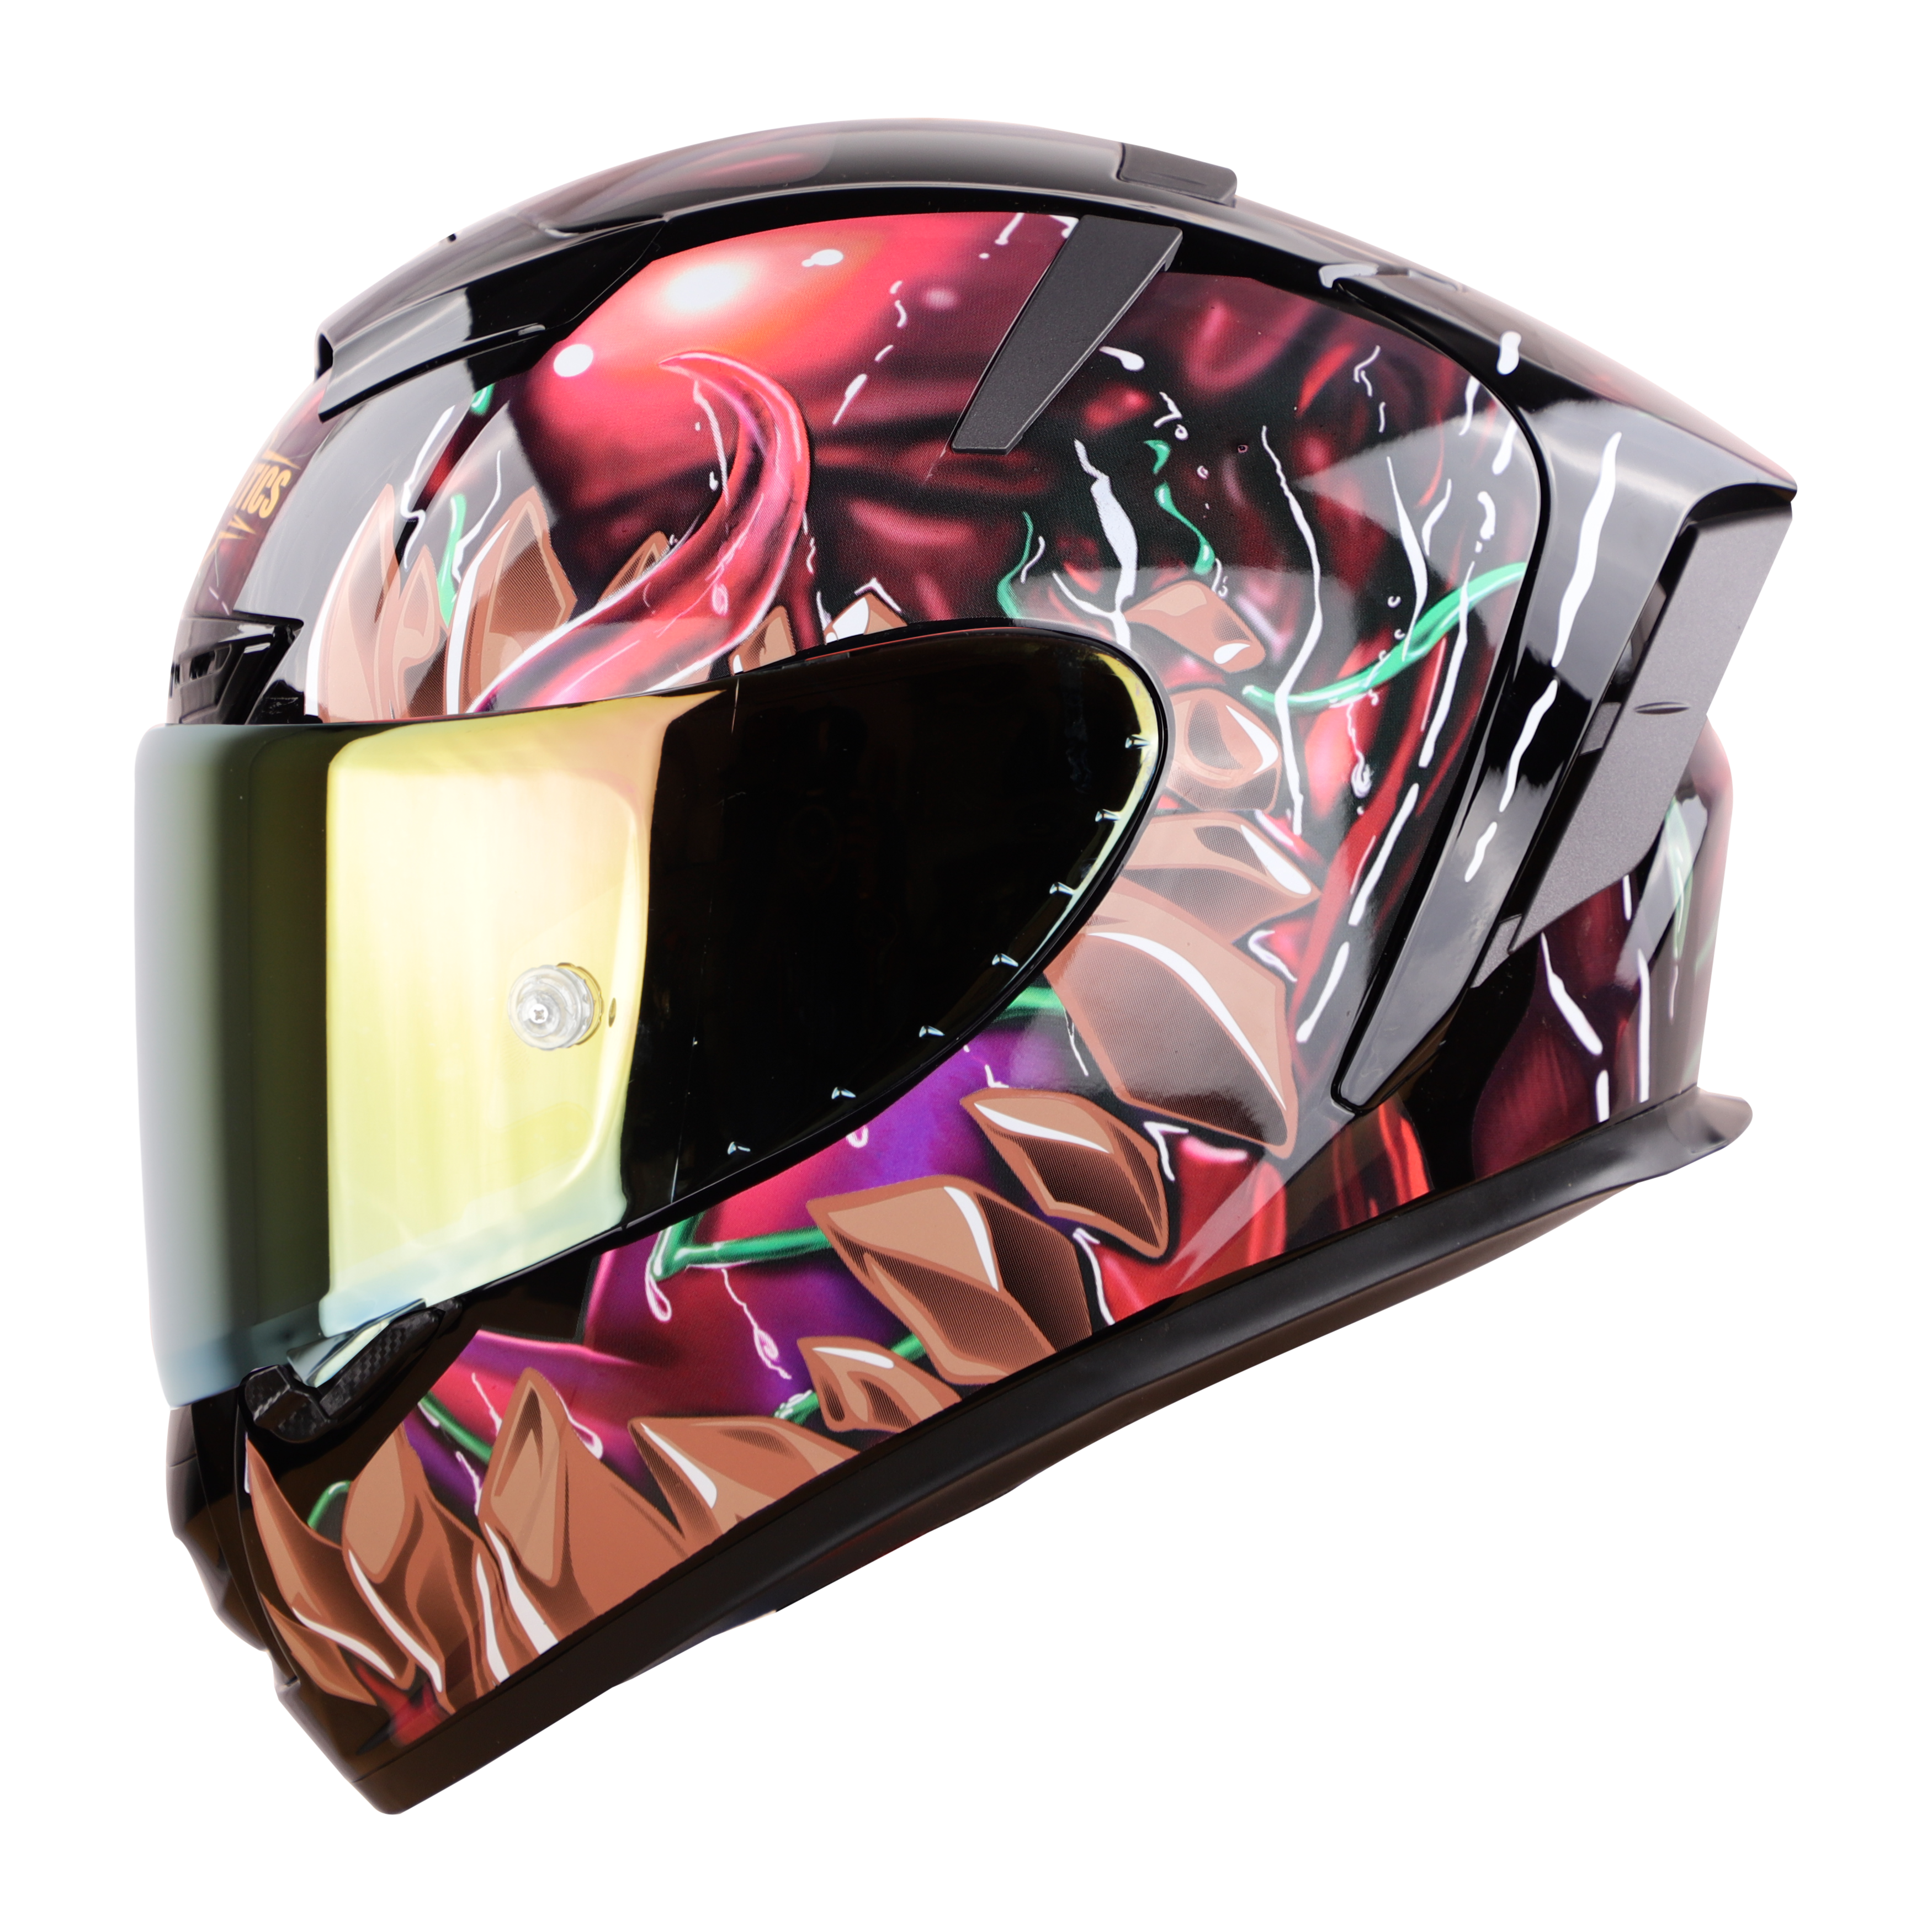 SA-2 FANTASY GLOSSY BLACK WITH COPPER (FITTED WITH CLEAR VISOR EXTRA GOLD CHROME VISOR FREE & WITH ANTI-FOG SHIELD HOLDER)